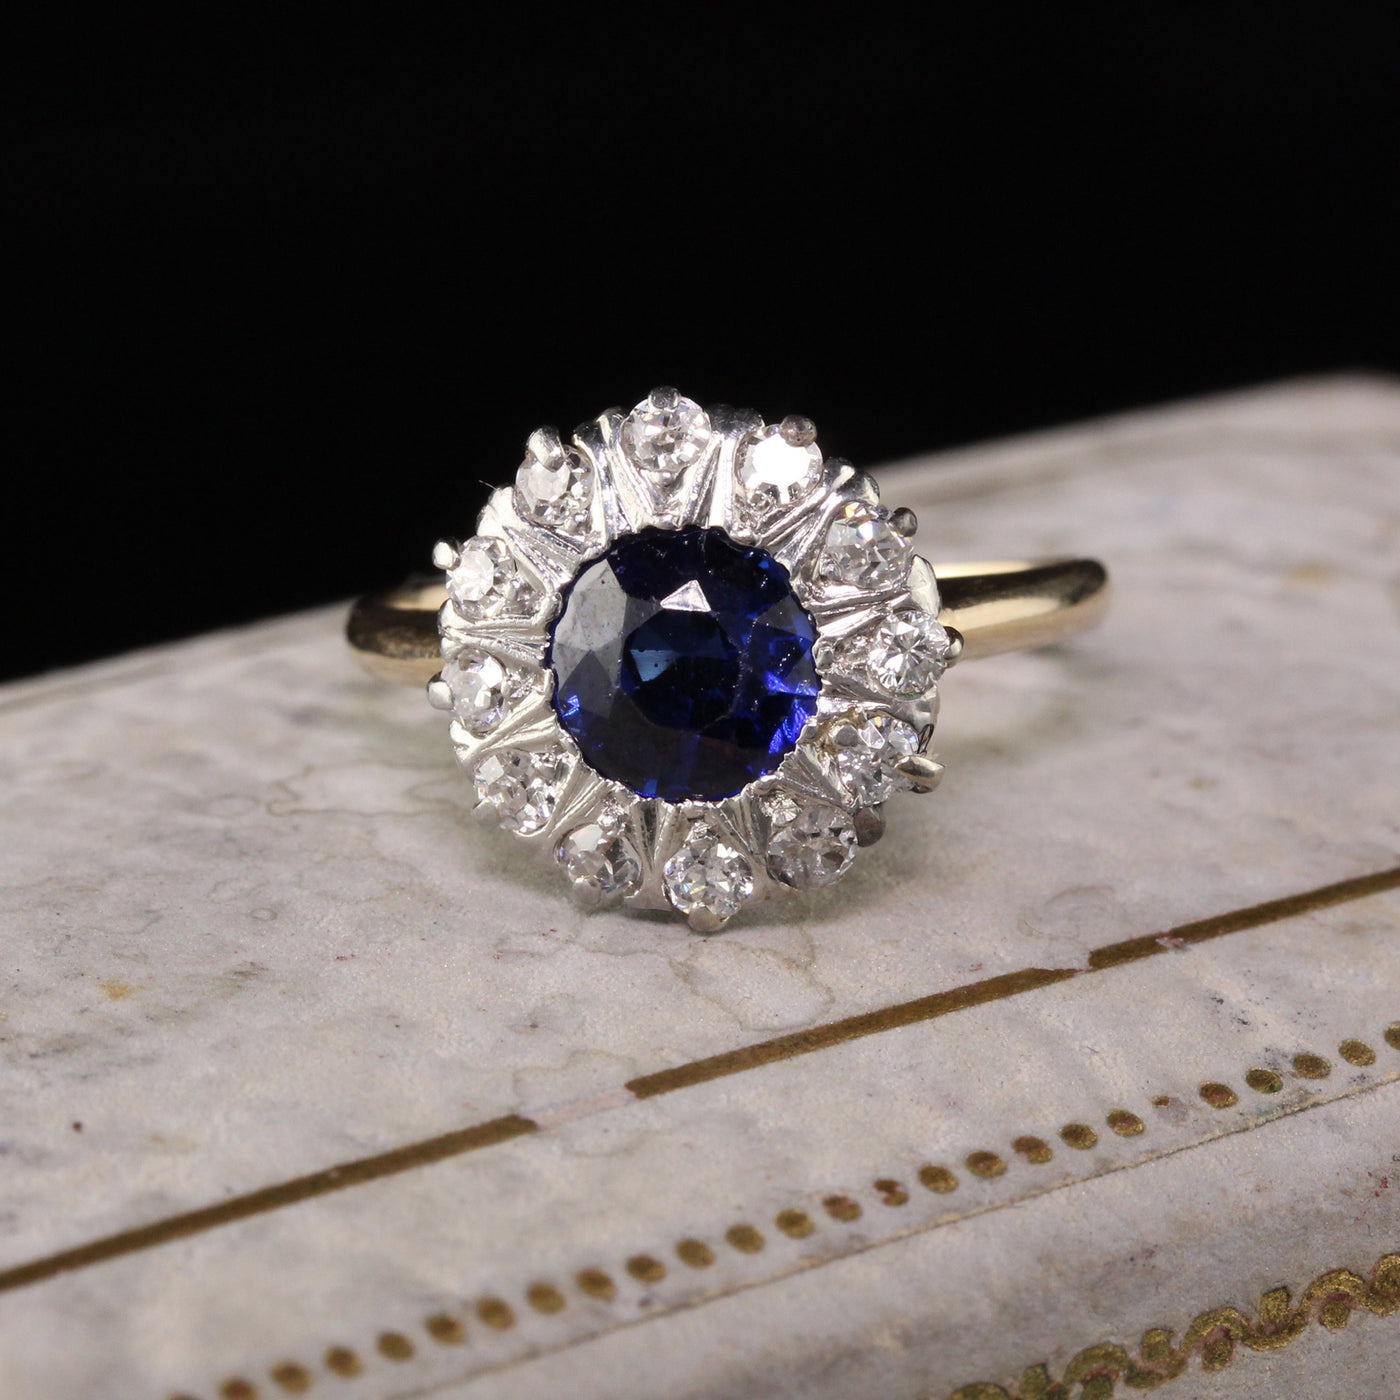 Antique Victorian 14K Yellow Gold Old Mine Cut Diamond Sapphire Engagement Ring